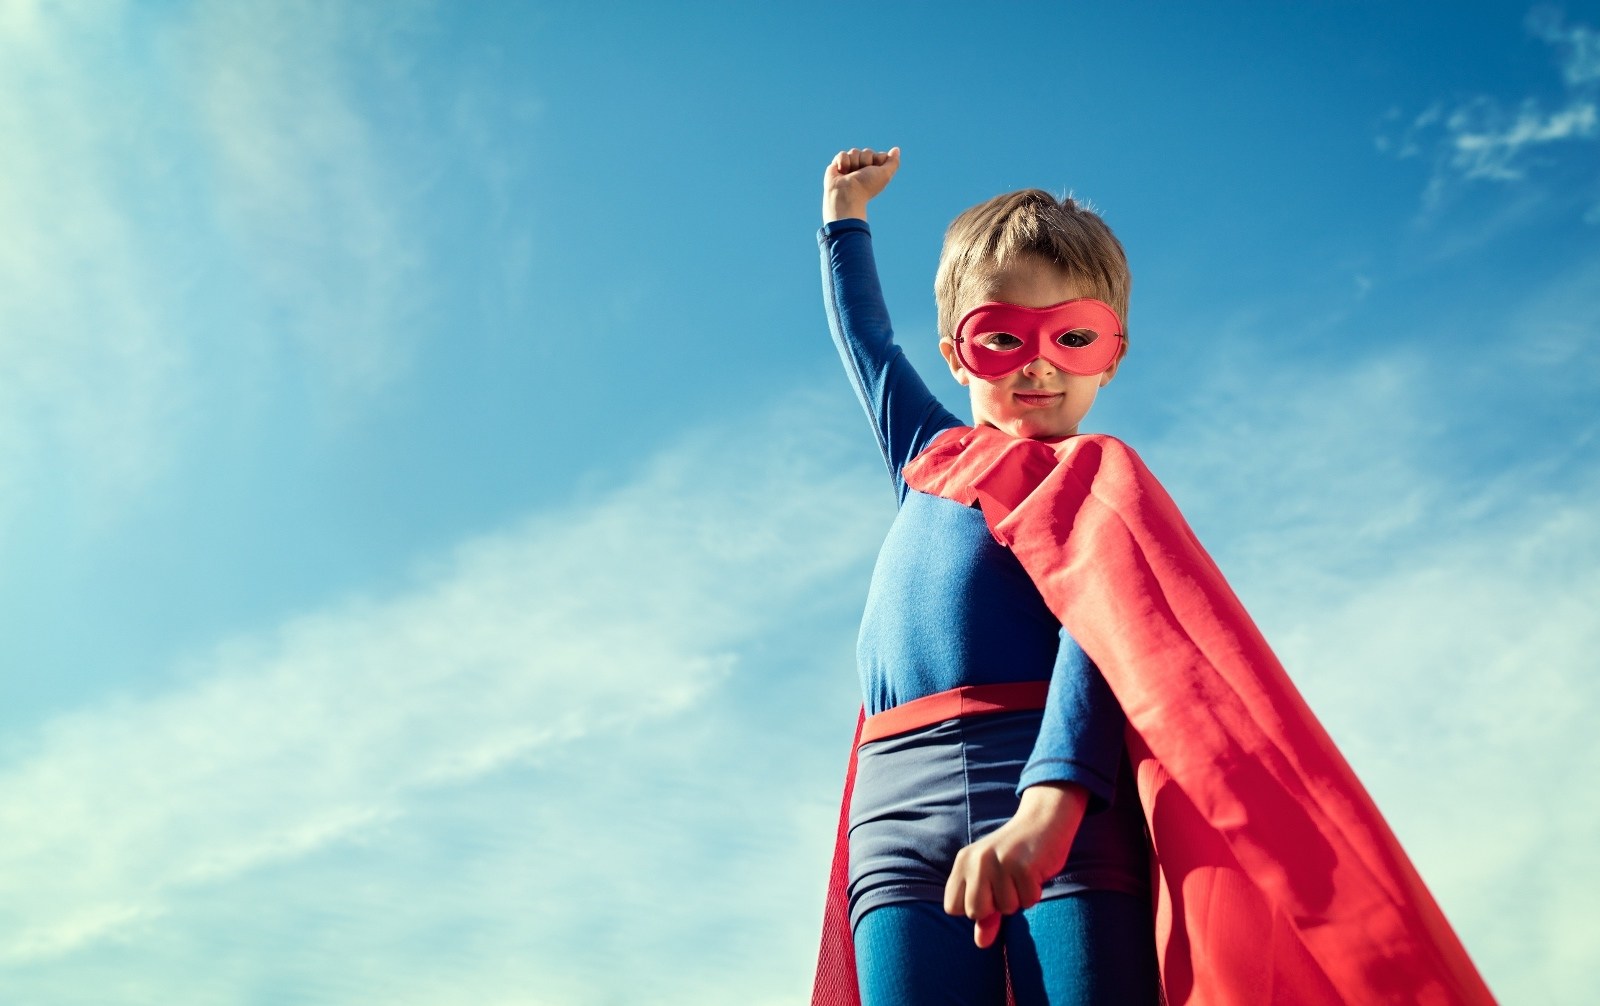 Form Your Superhero Dream Team and We’ll Guess Your Age With 99% Accuracy Superhero child concept for childhood, imagination and aspirations